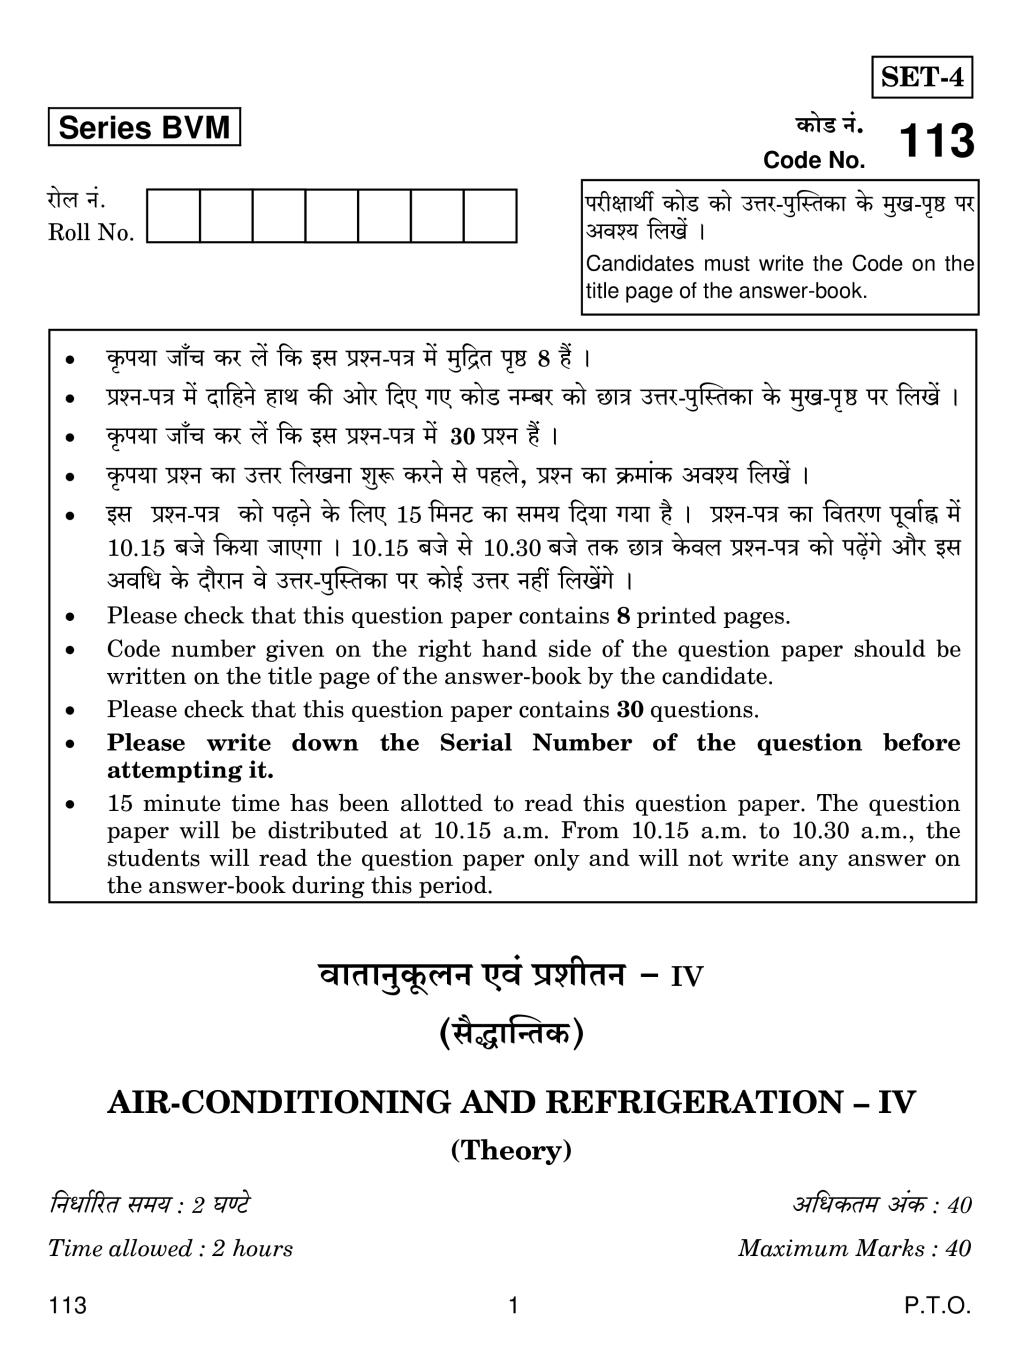 CBSE Class 12 Air-Conditioning and Refrigeration IV Question Paper 2019 - Page 1